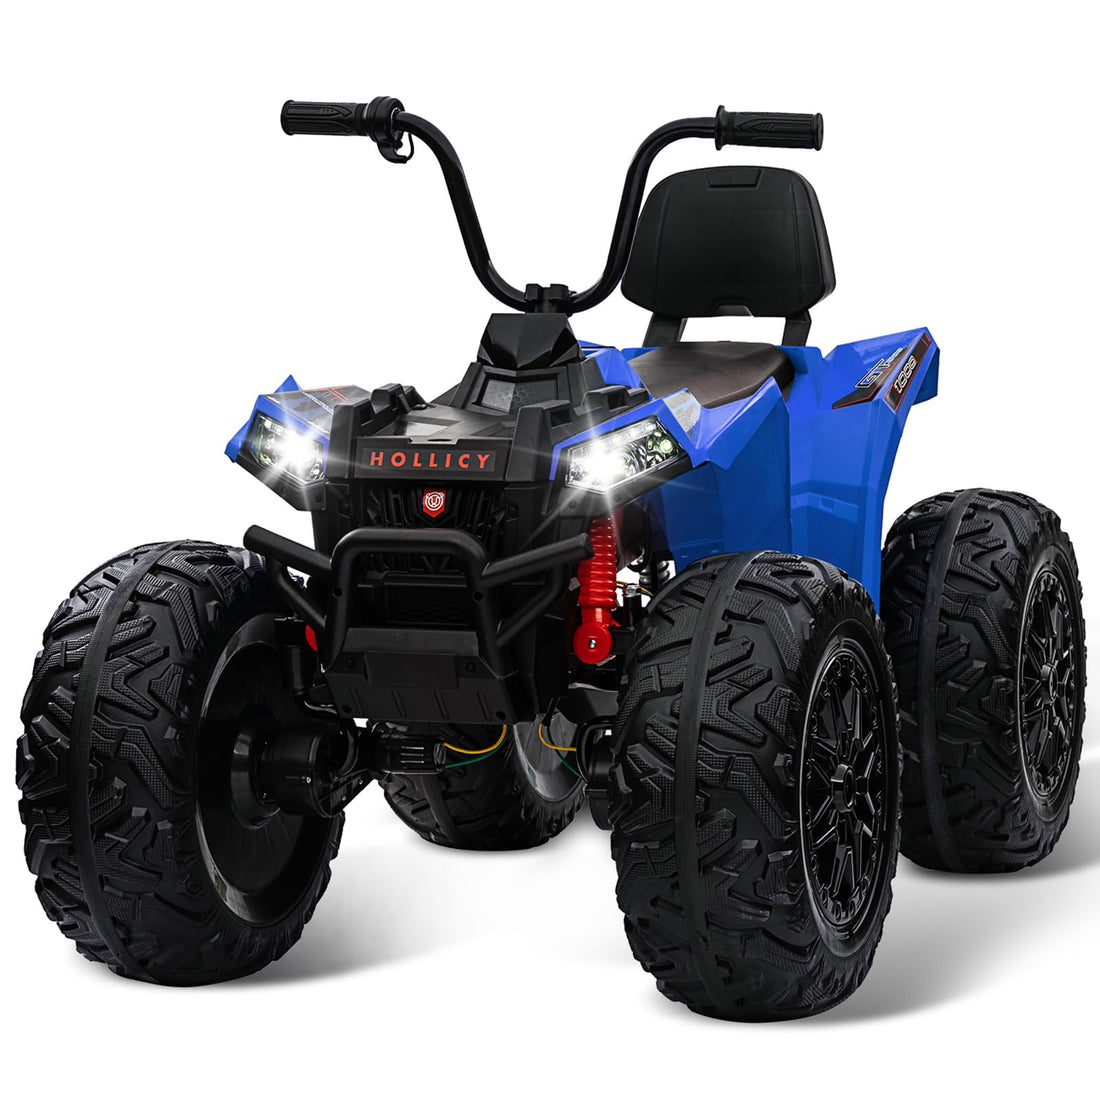 24V Kids ATV, Hetoy Ride on Car 4WD Quad Electric Vehicle, 4x80W Powerful Engine, with 7AHx2 Large Battery, Accelerator Handle, EVA Tire, Full Metal Suspension, LED Light, Bluetooth&Music, Blue-Black